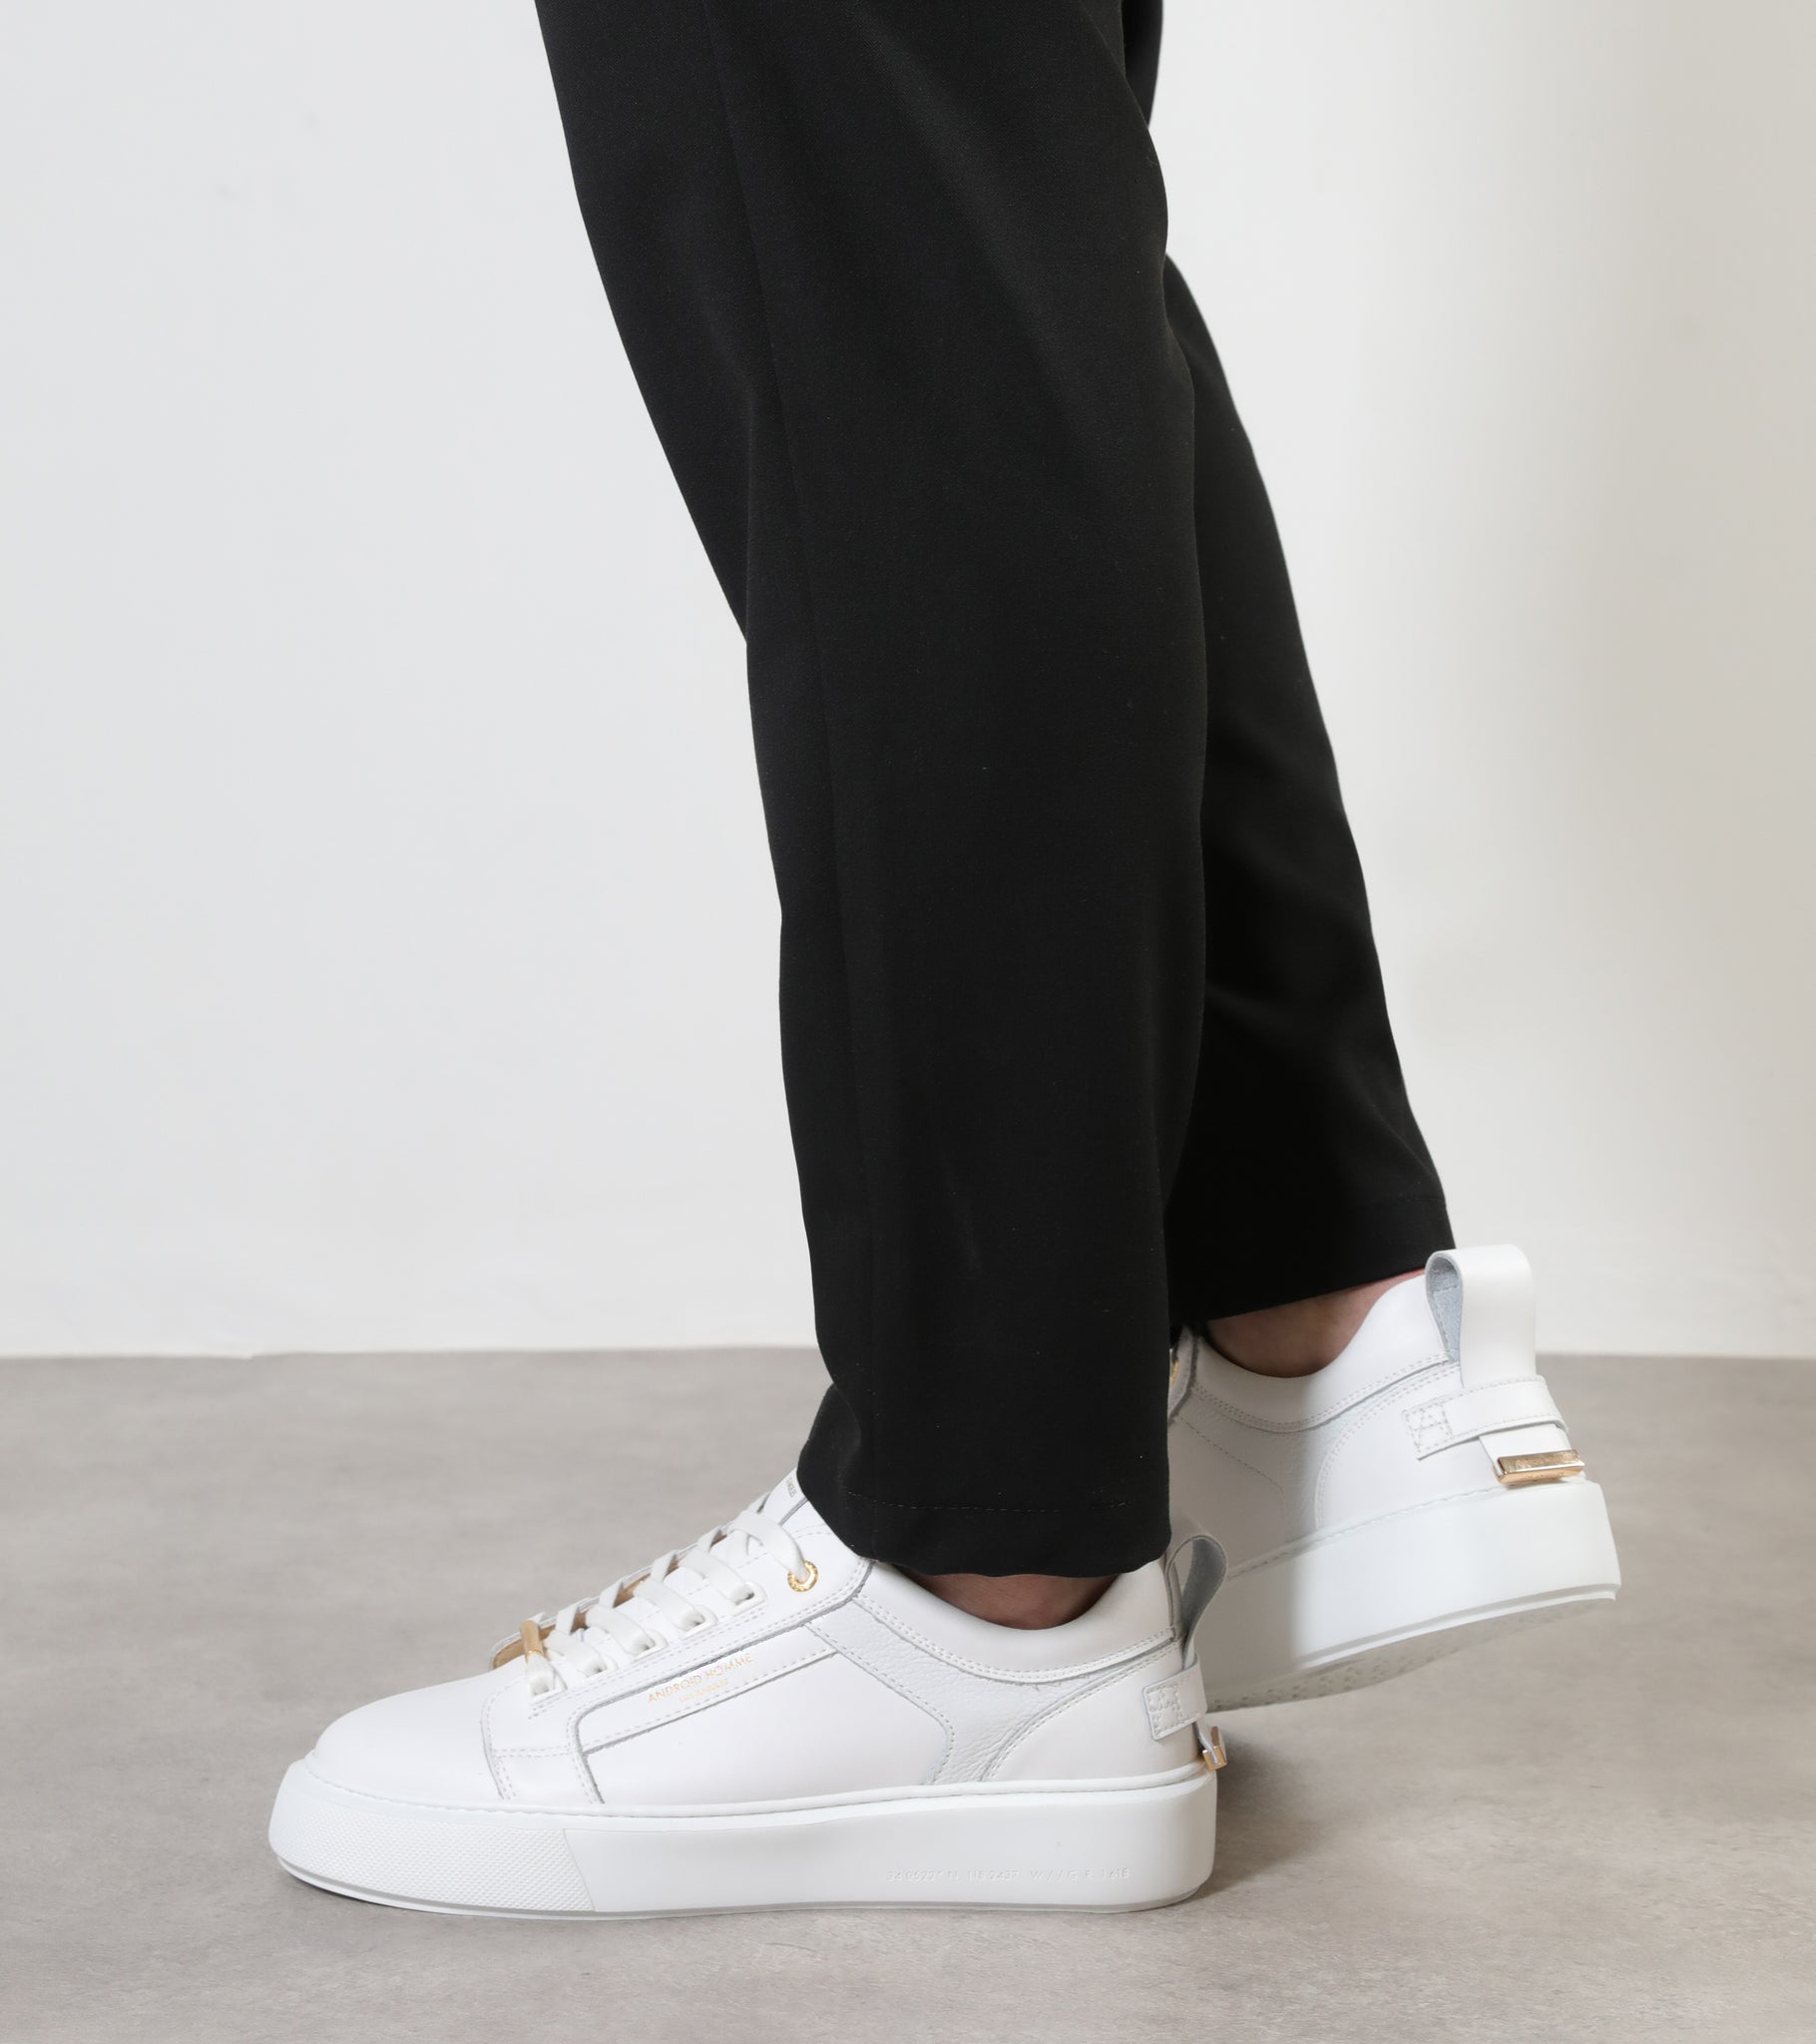 Venice Oversized | White Leather AHP233-31